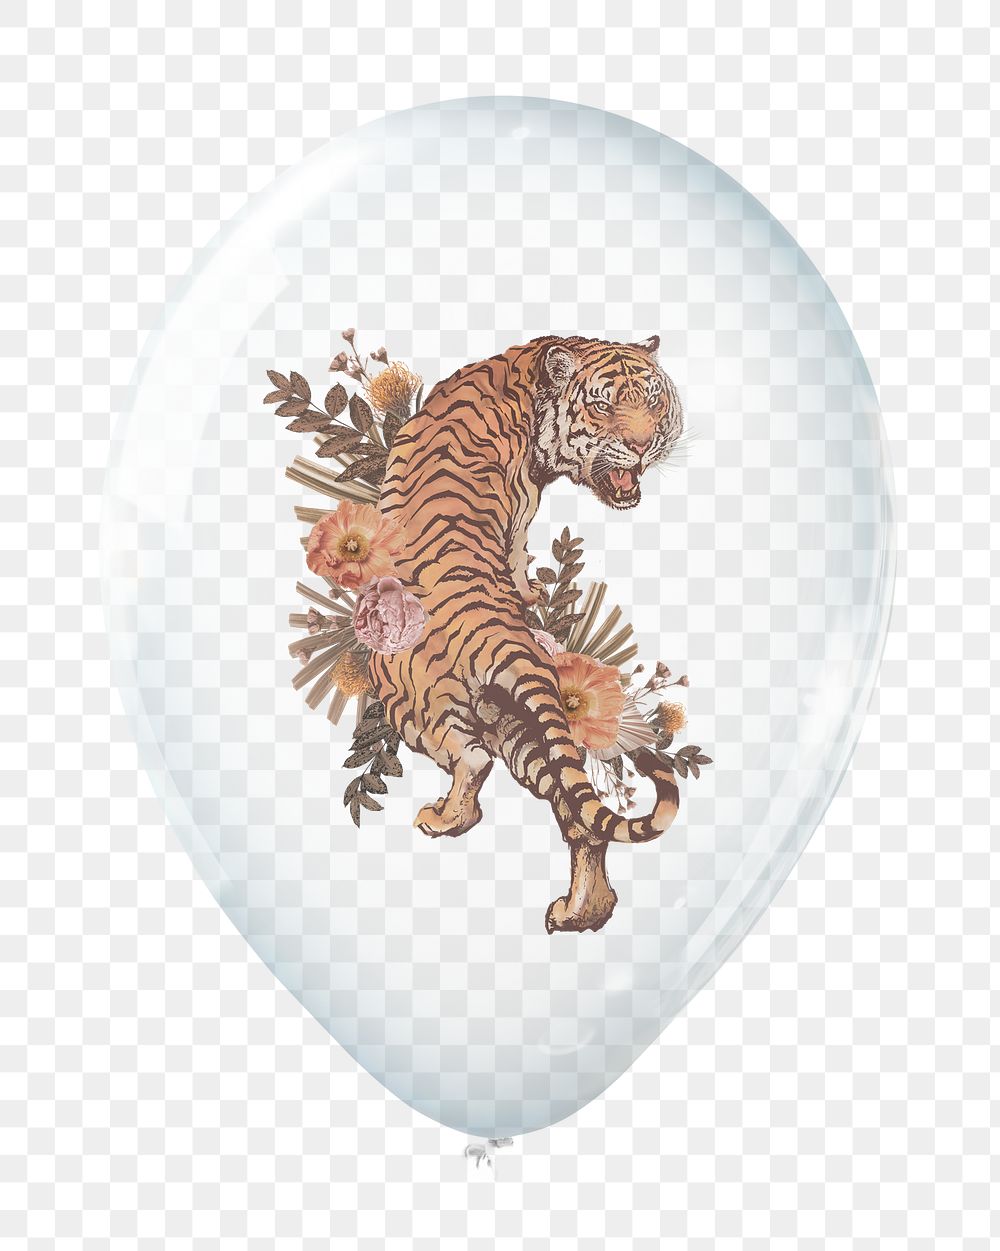 Roaring tiger png sticker, wildlife in clear balloon, transparent background